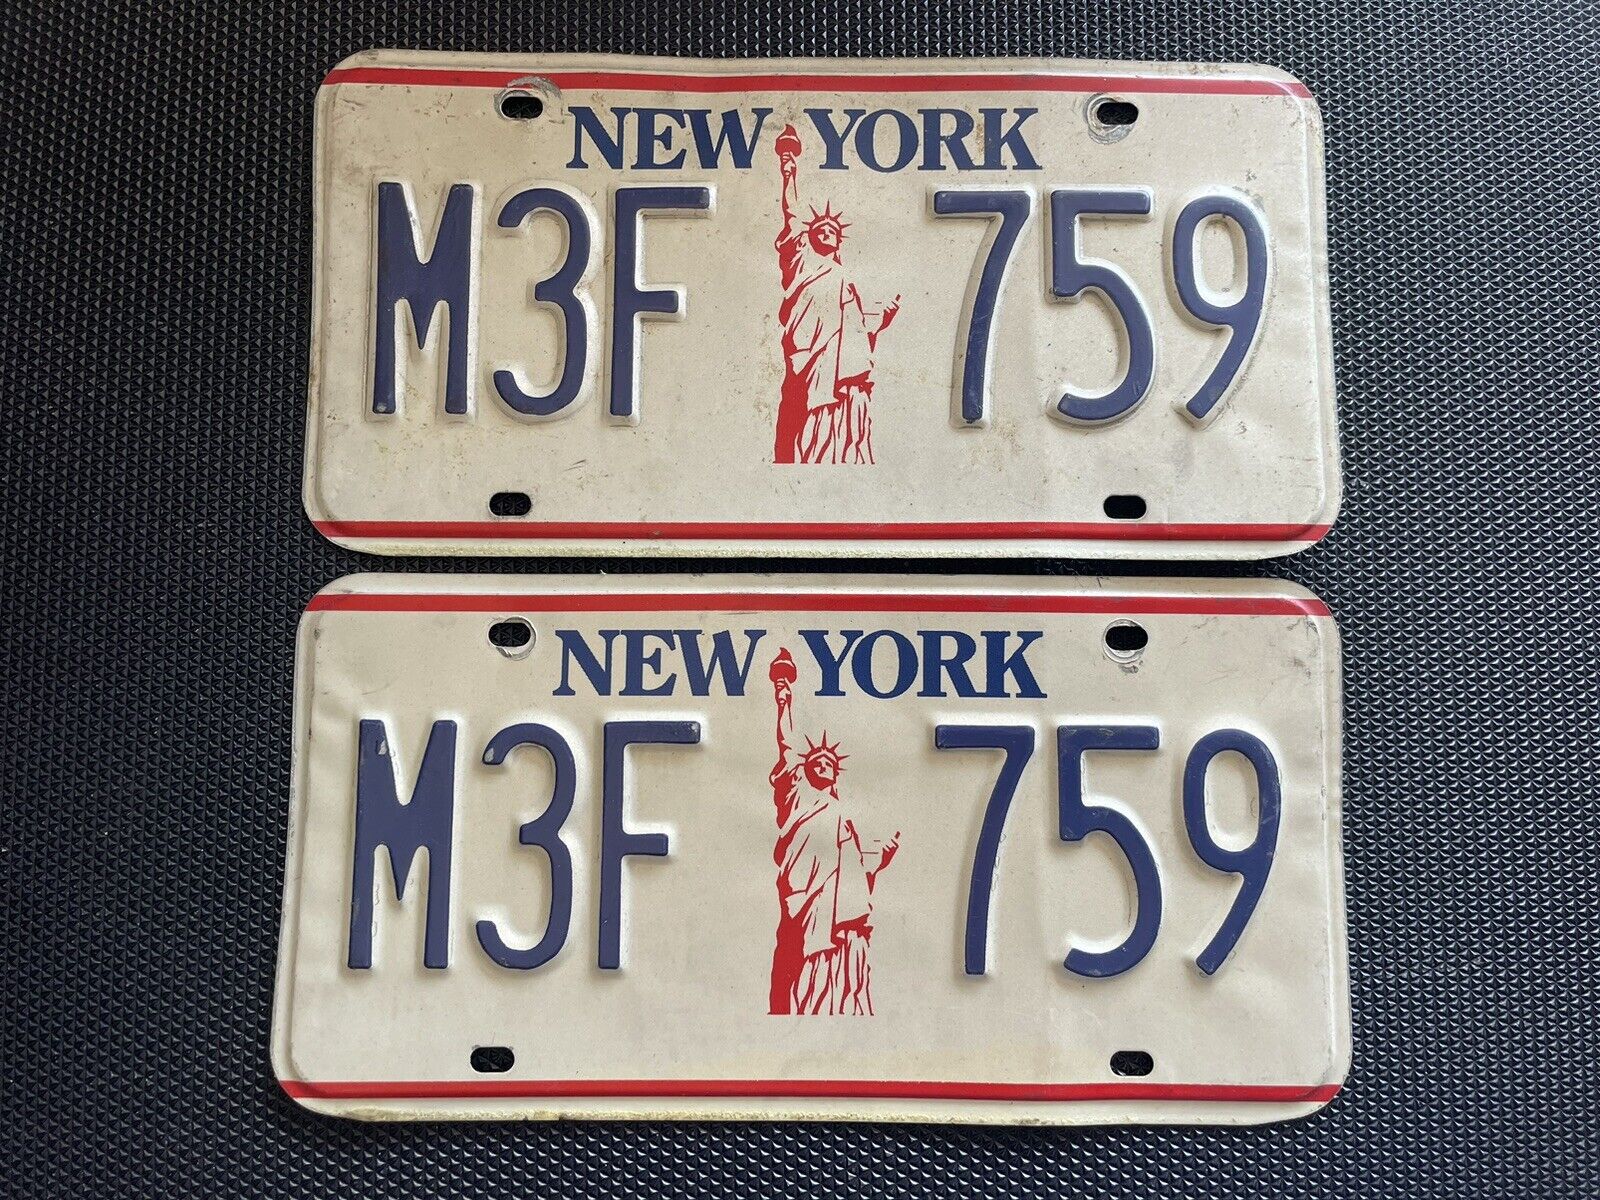 PAIR OF NEW YORK LICENSE PLATES STATUE OF LIBERTY M3F 759